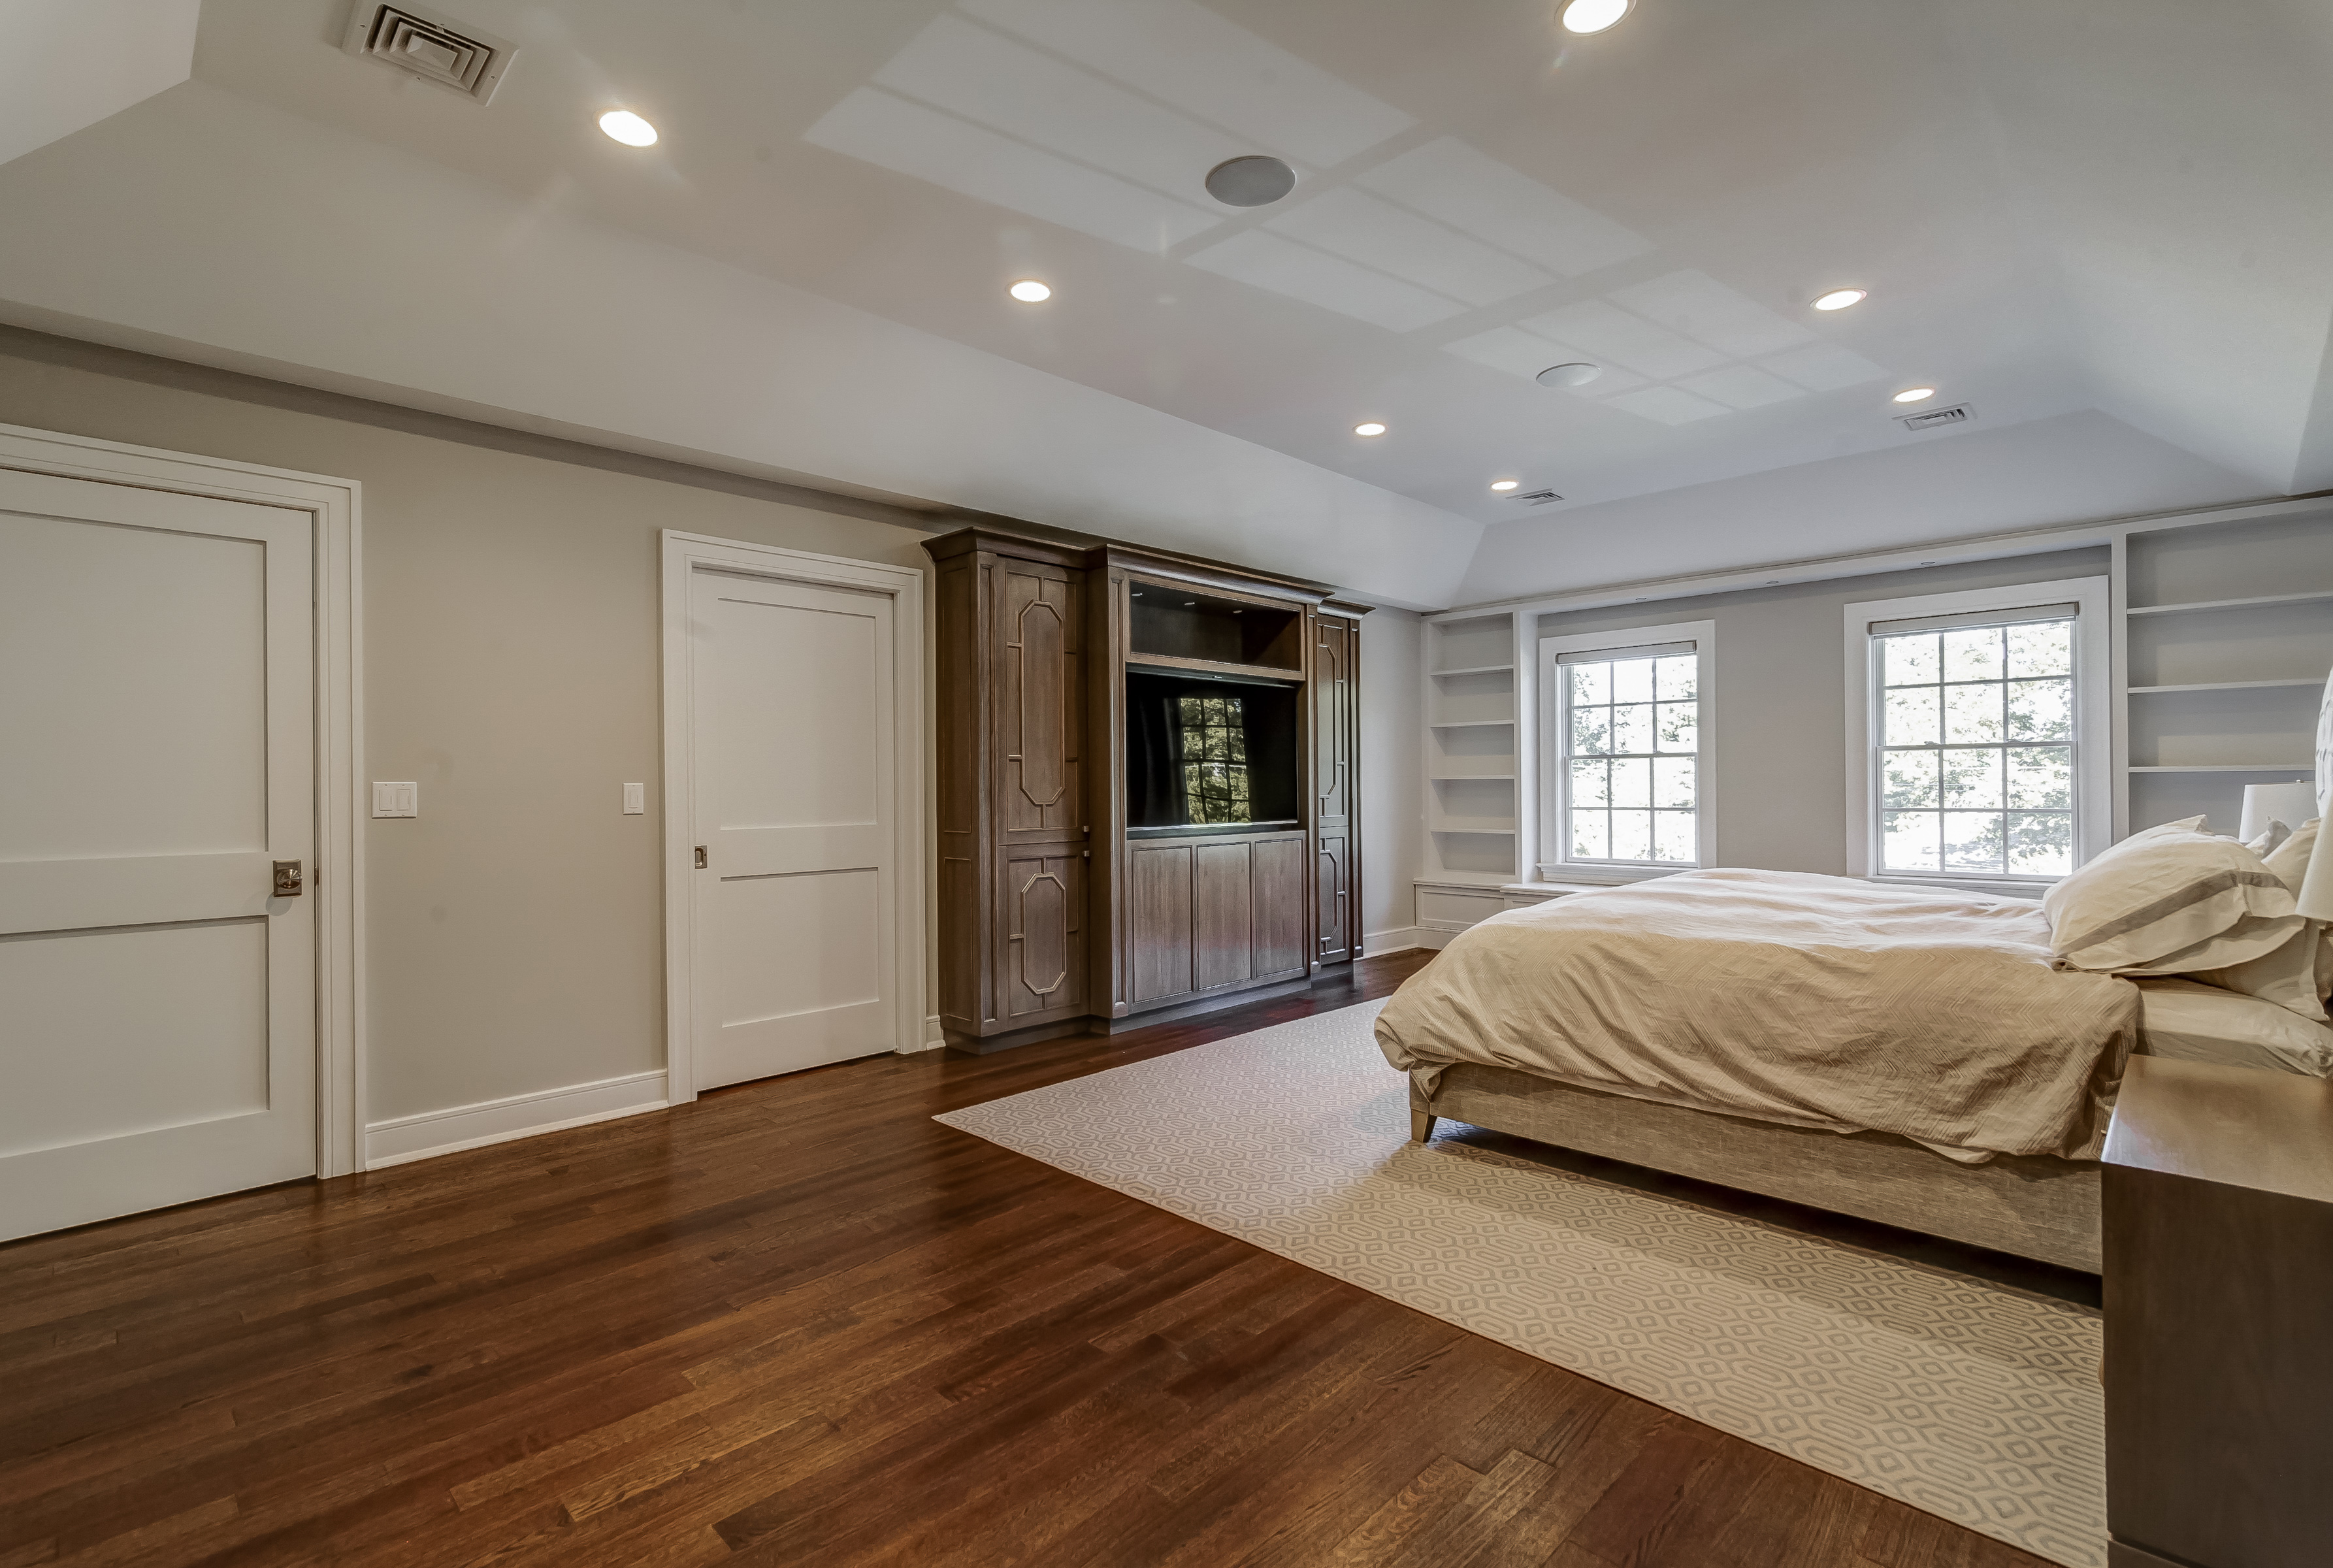 17 – Luxurious Master Bedroom – 20 Troy Drive, Example of Most Recent Project from Builder